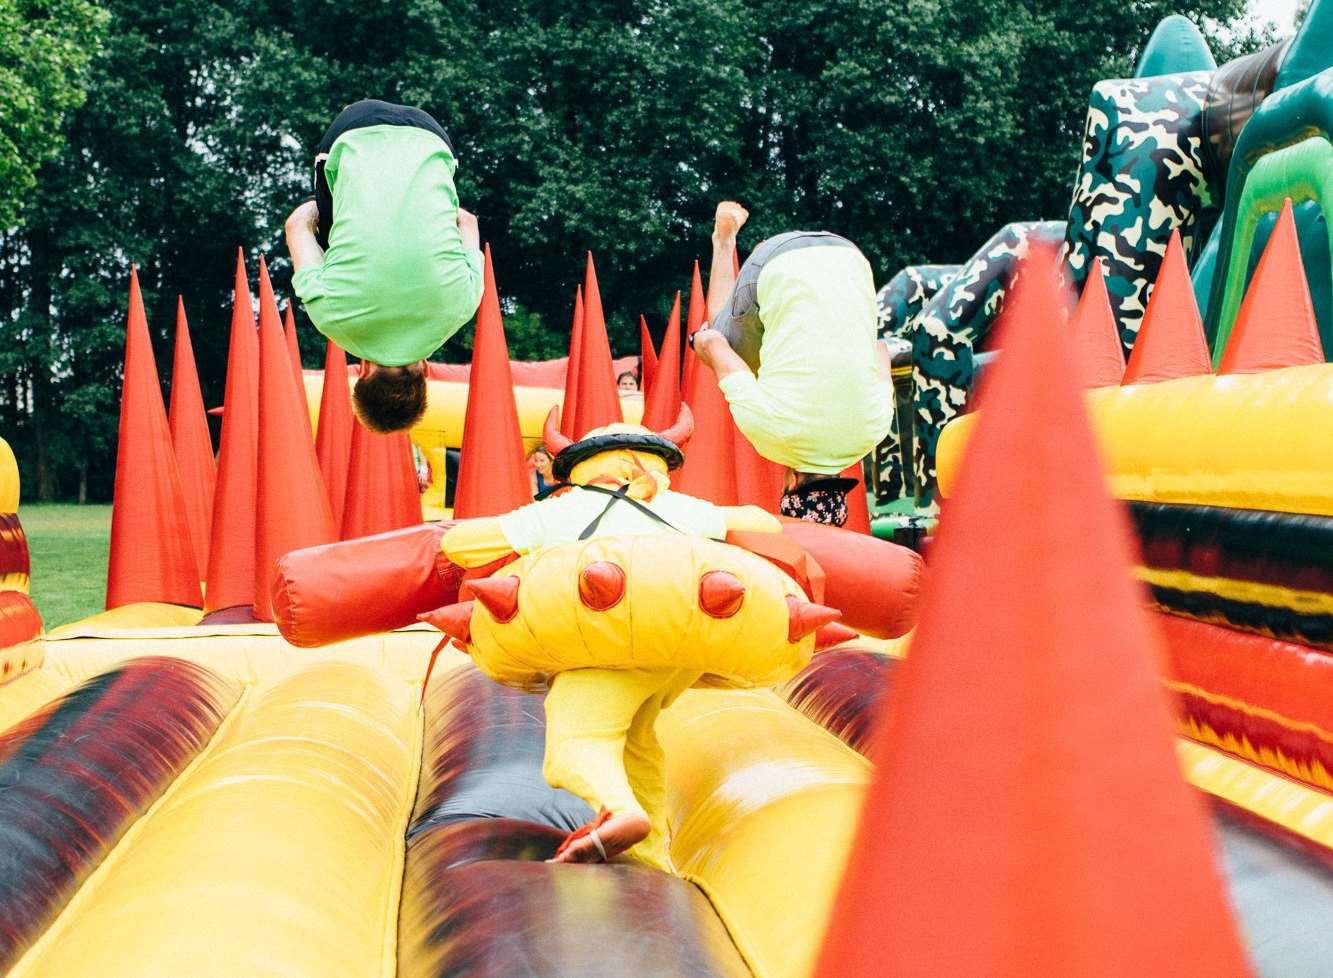 The inflatable obstacle course will make its UK debut at Betteshanger Park